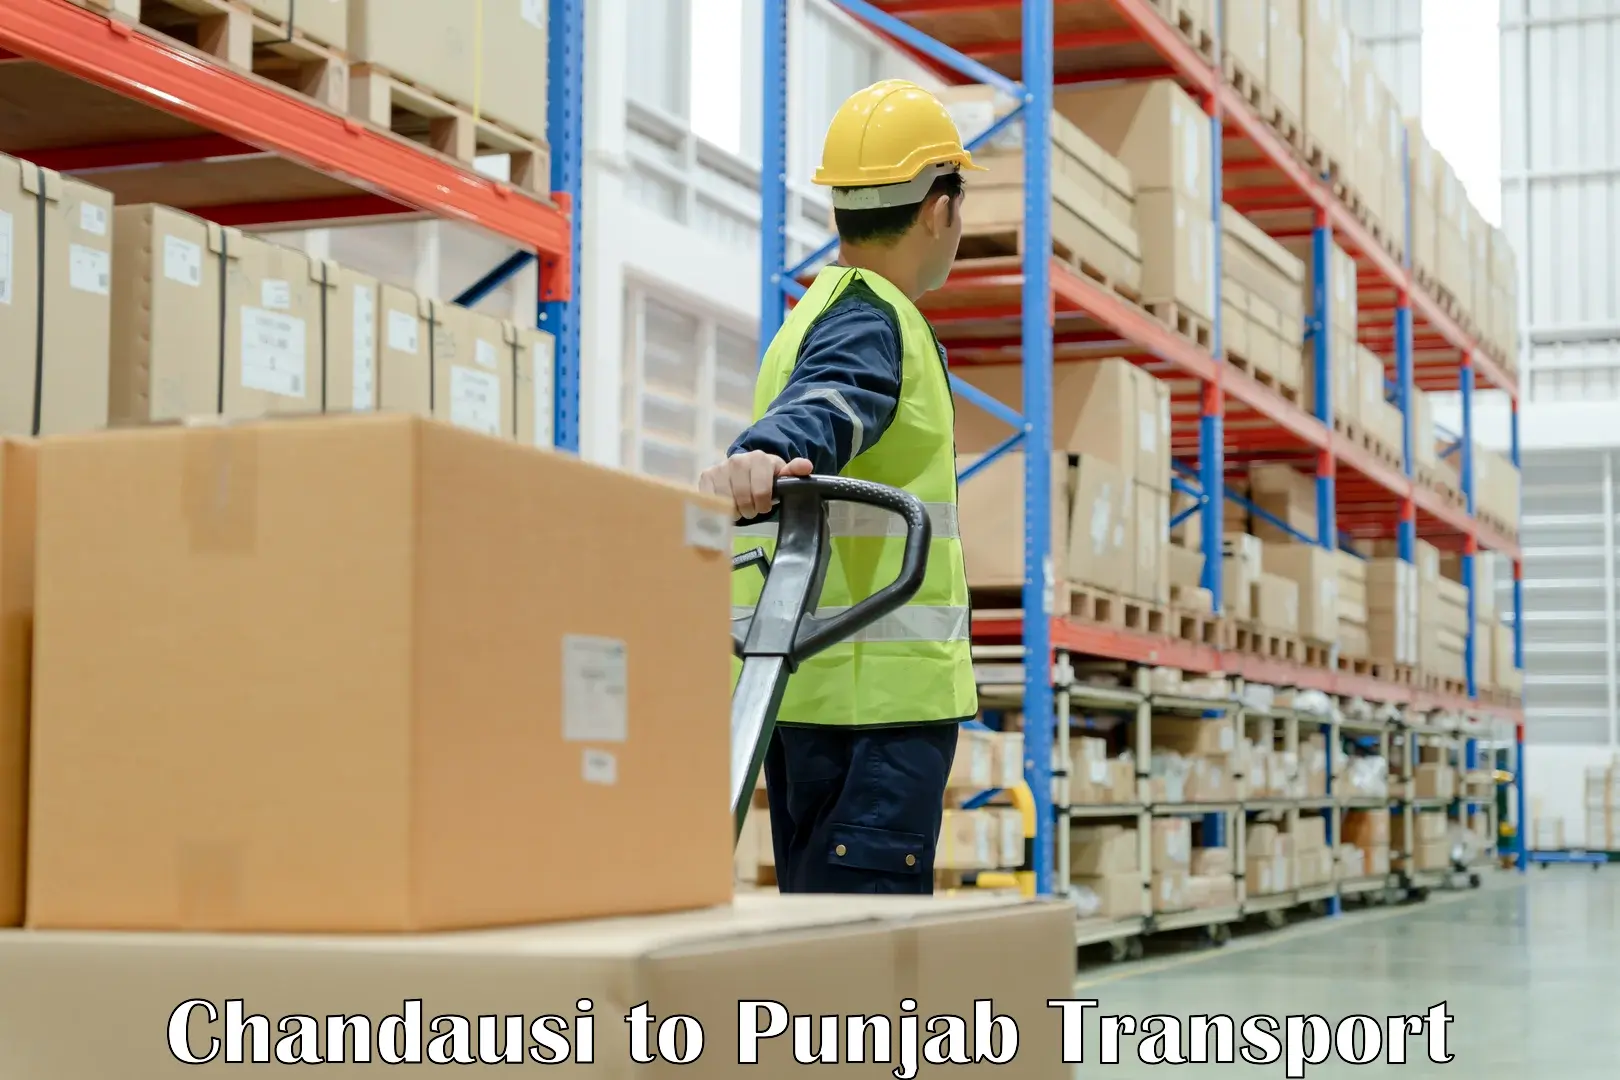 Goods delivery service Chandausi to Punjab